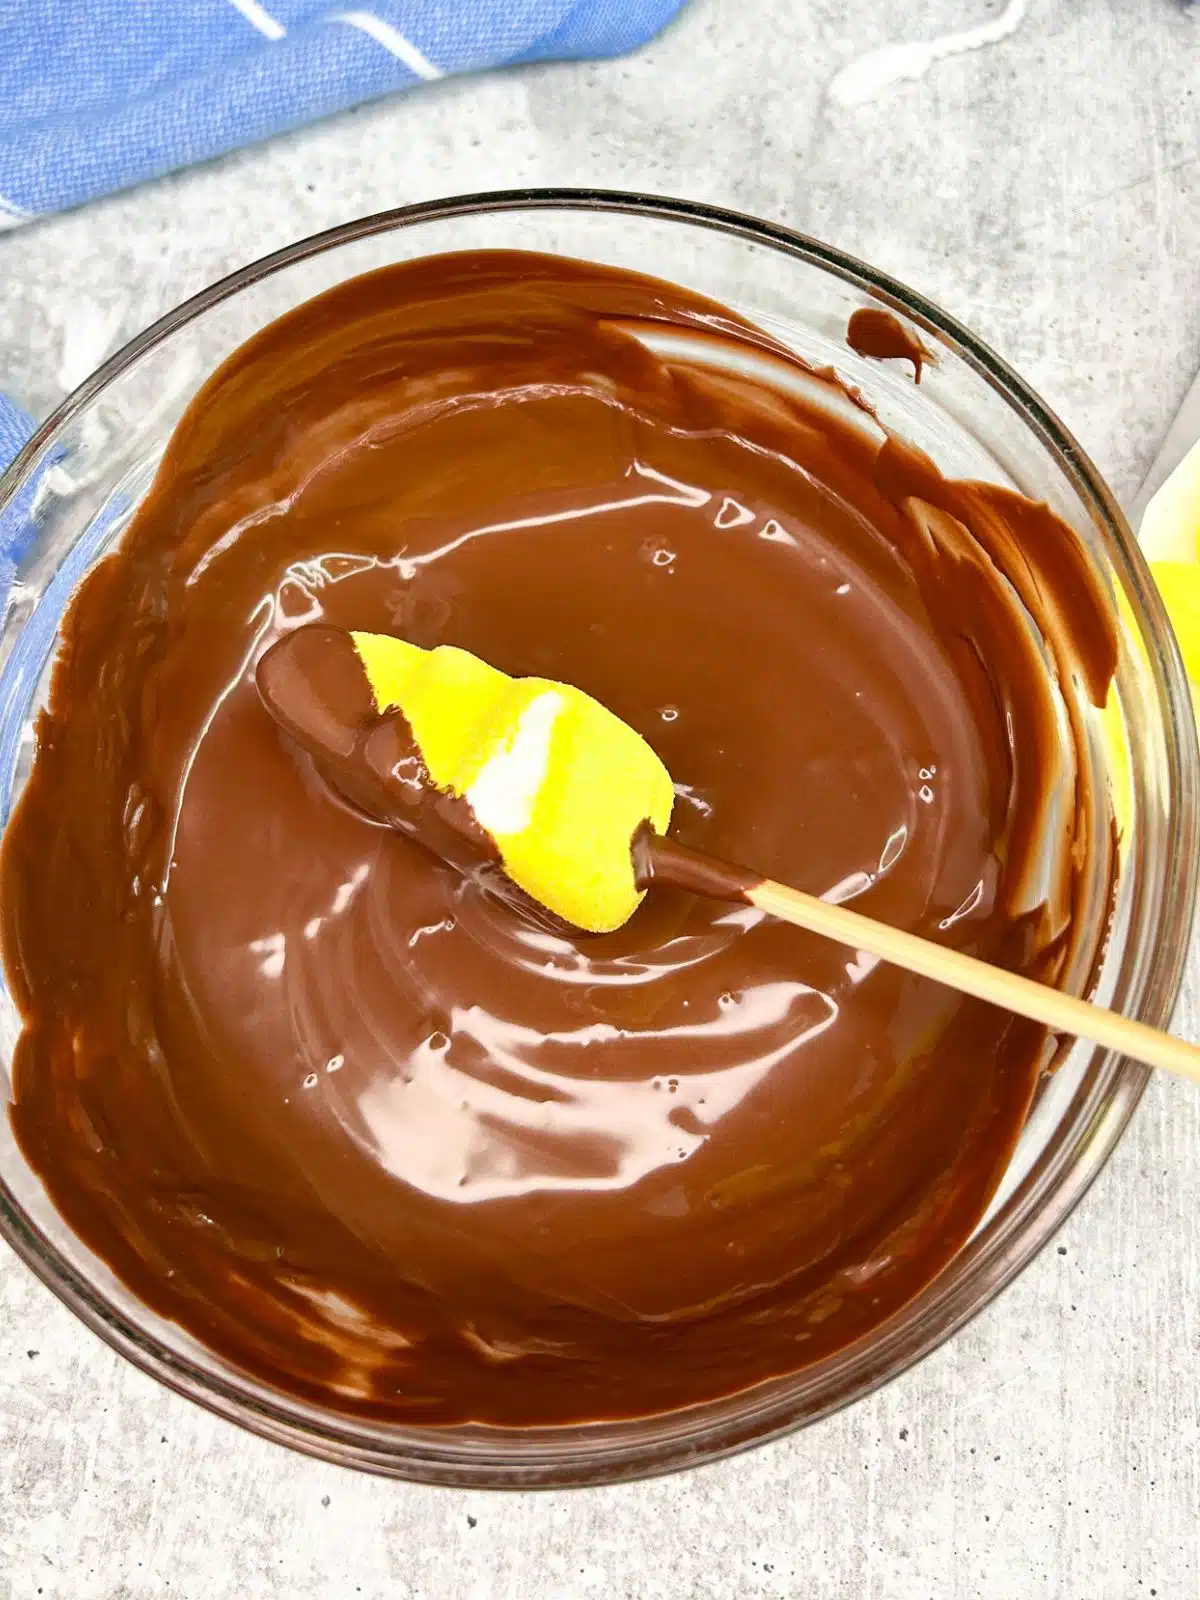 dip yellow marshmallow Peep in melted chocolate.